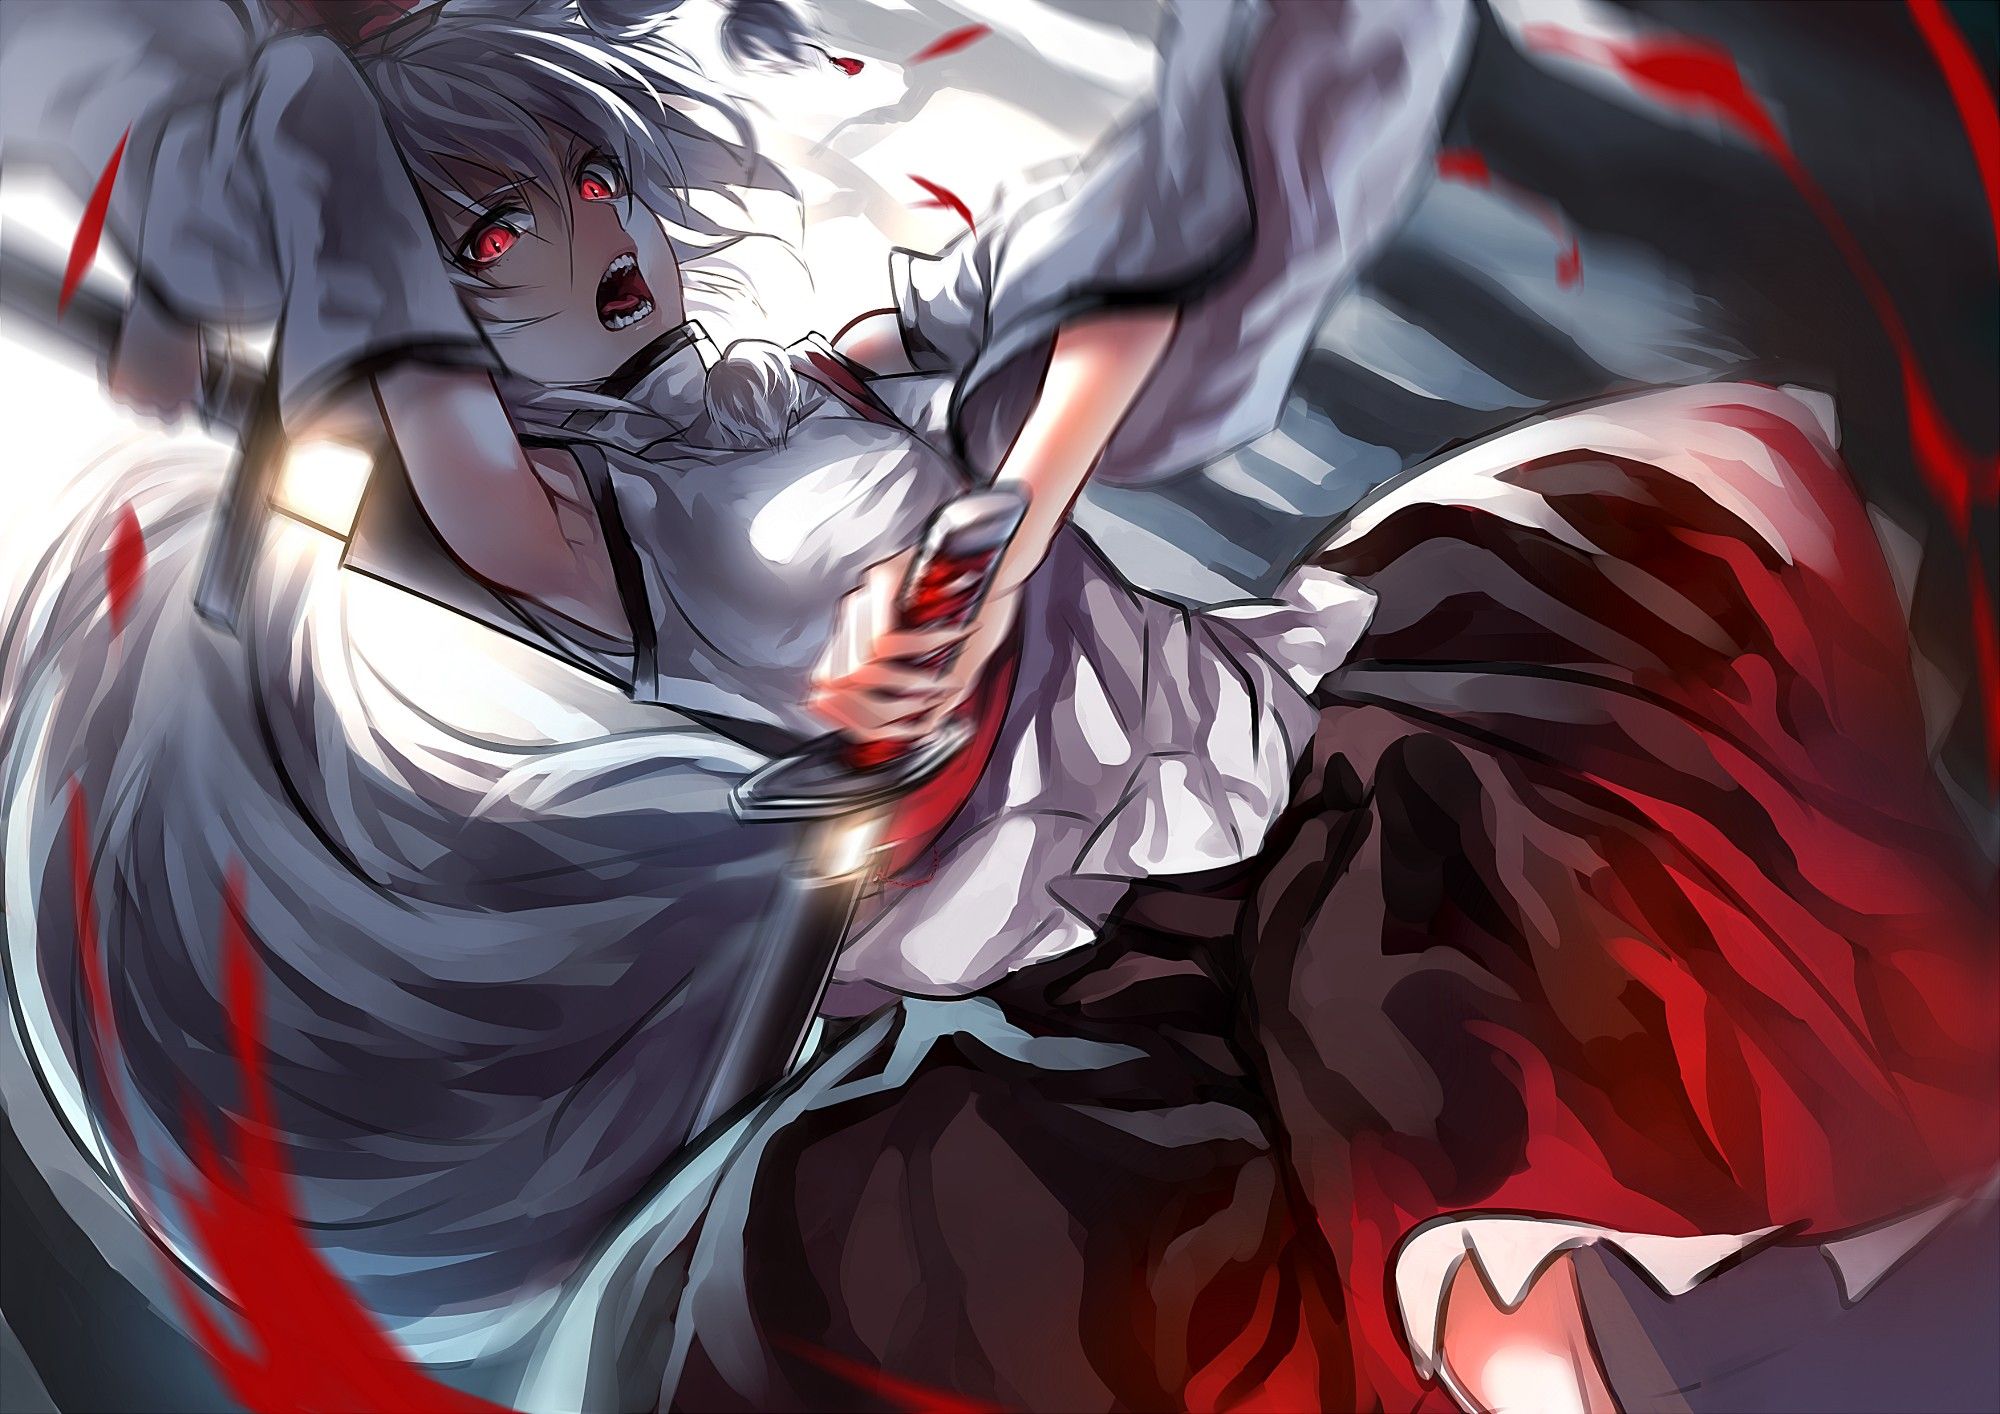 Fighter Anime Girls With White Hair Wallpaper